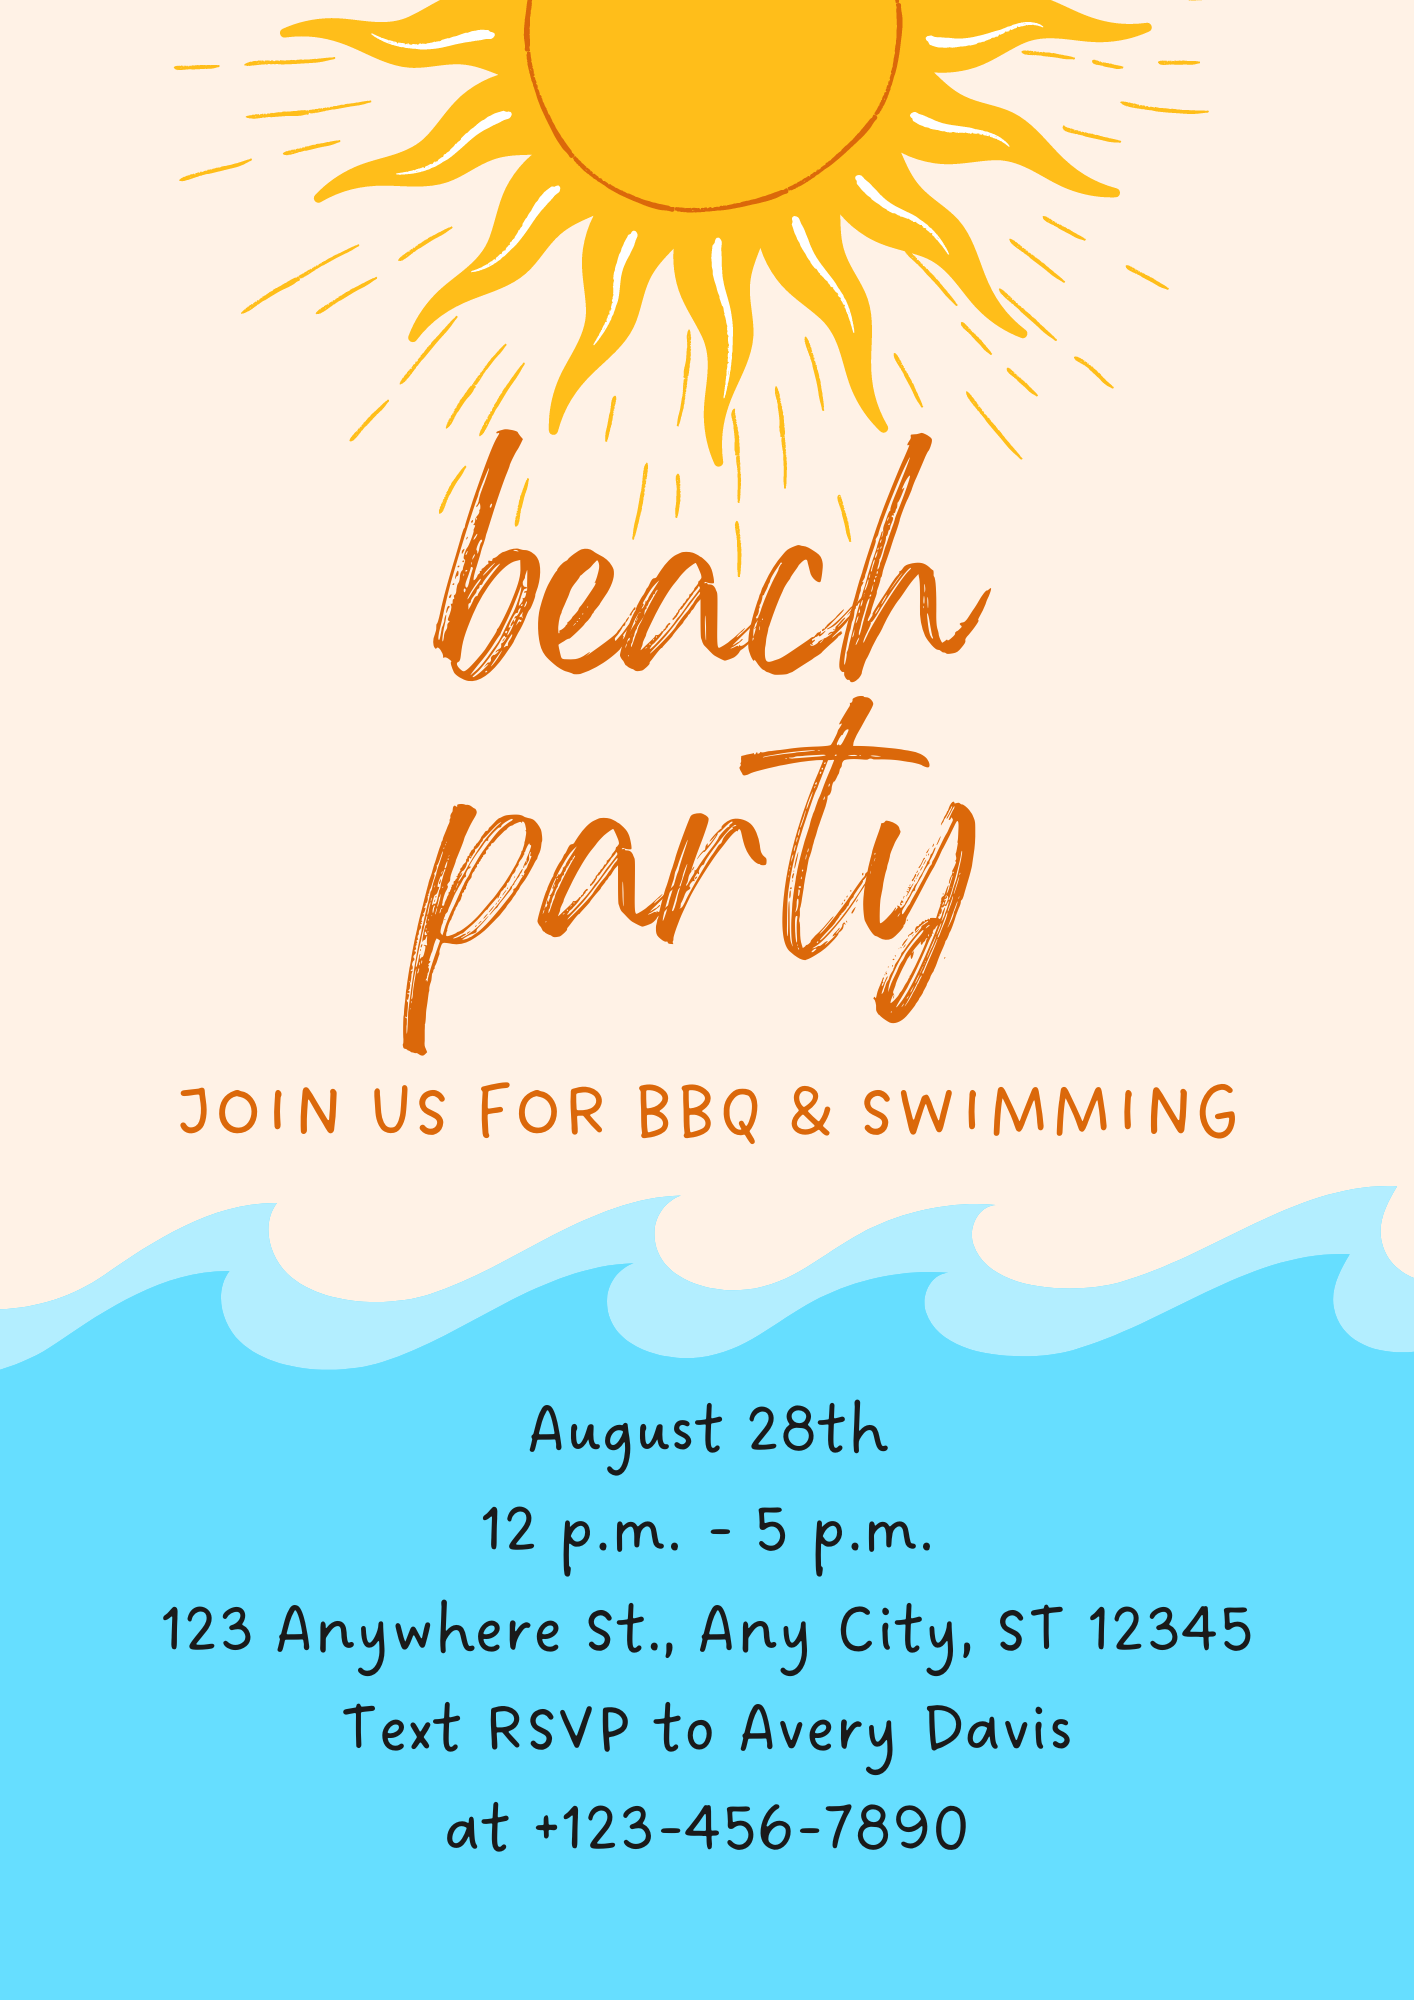 Flyer 8 - Yellow Orange Blue Colorful Fun Creative Summer Beach Party Flyer.png